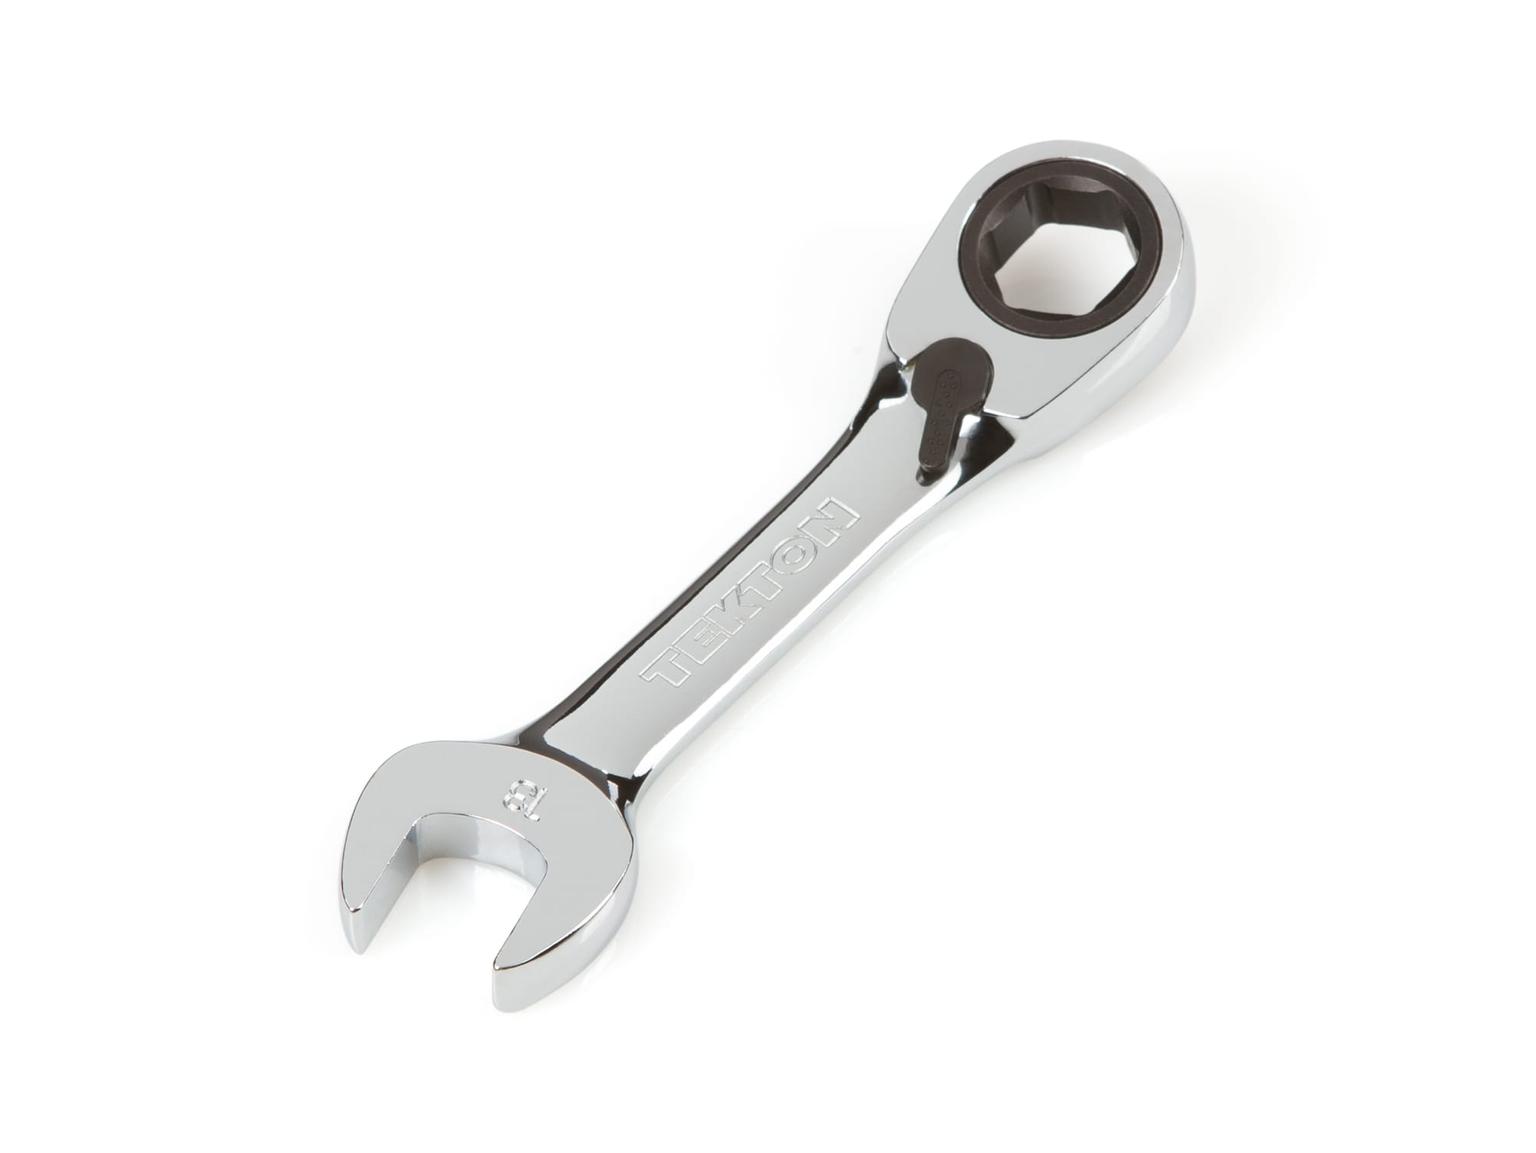 TEKTON WRN51113-T 13 mm Stubby Reversible Ratcheting Combination Wrench